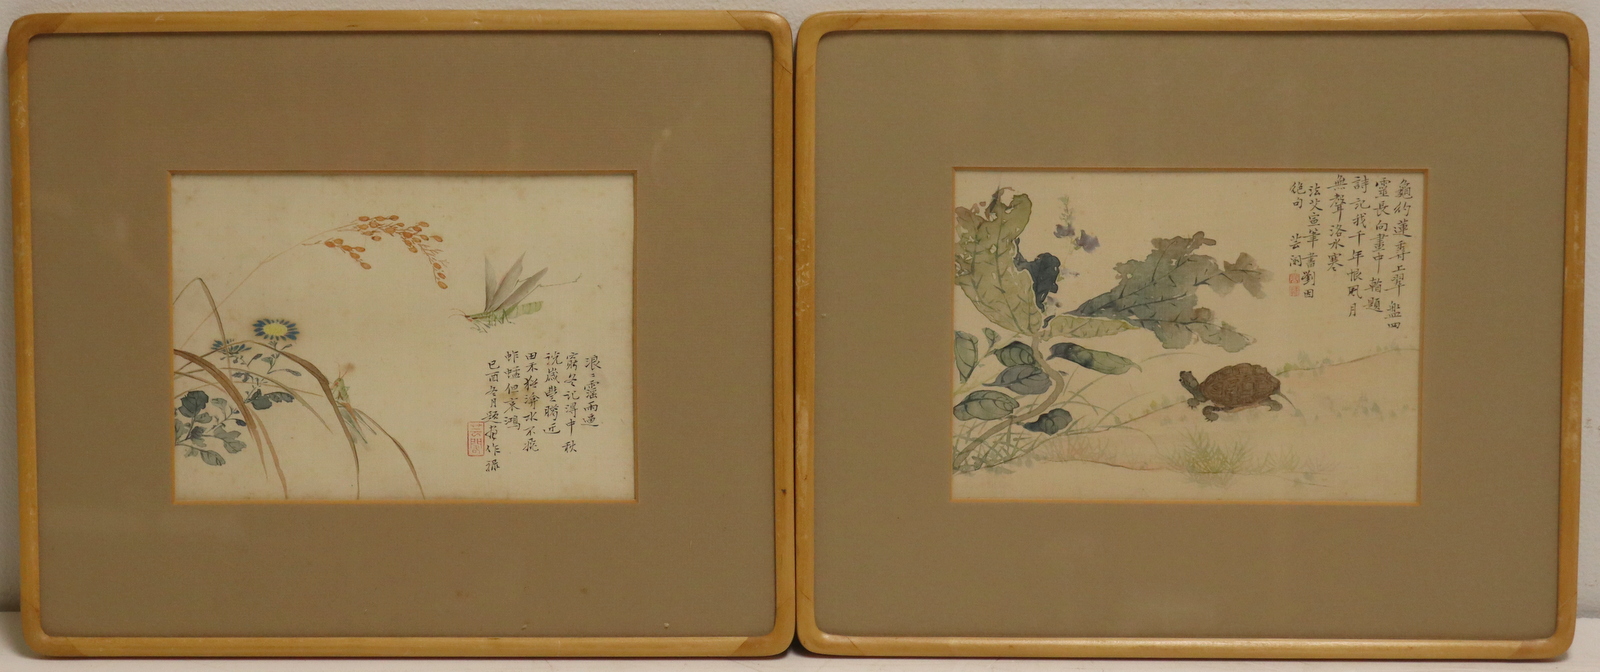 PAIR OF SIGNED CHINESE WATERCOLORS 3be854